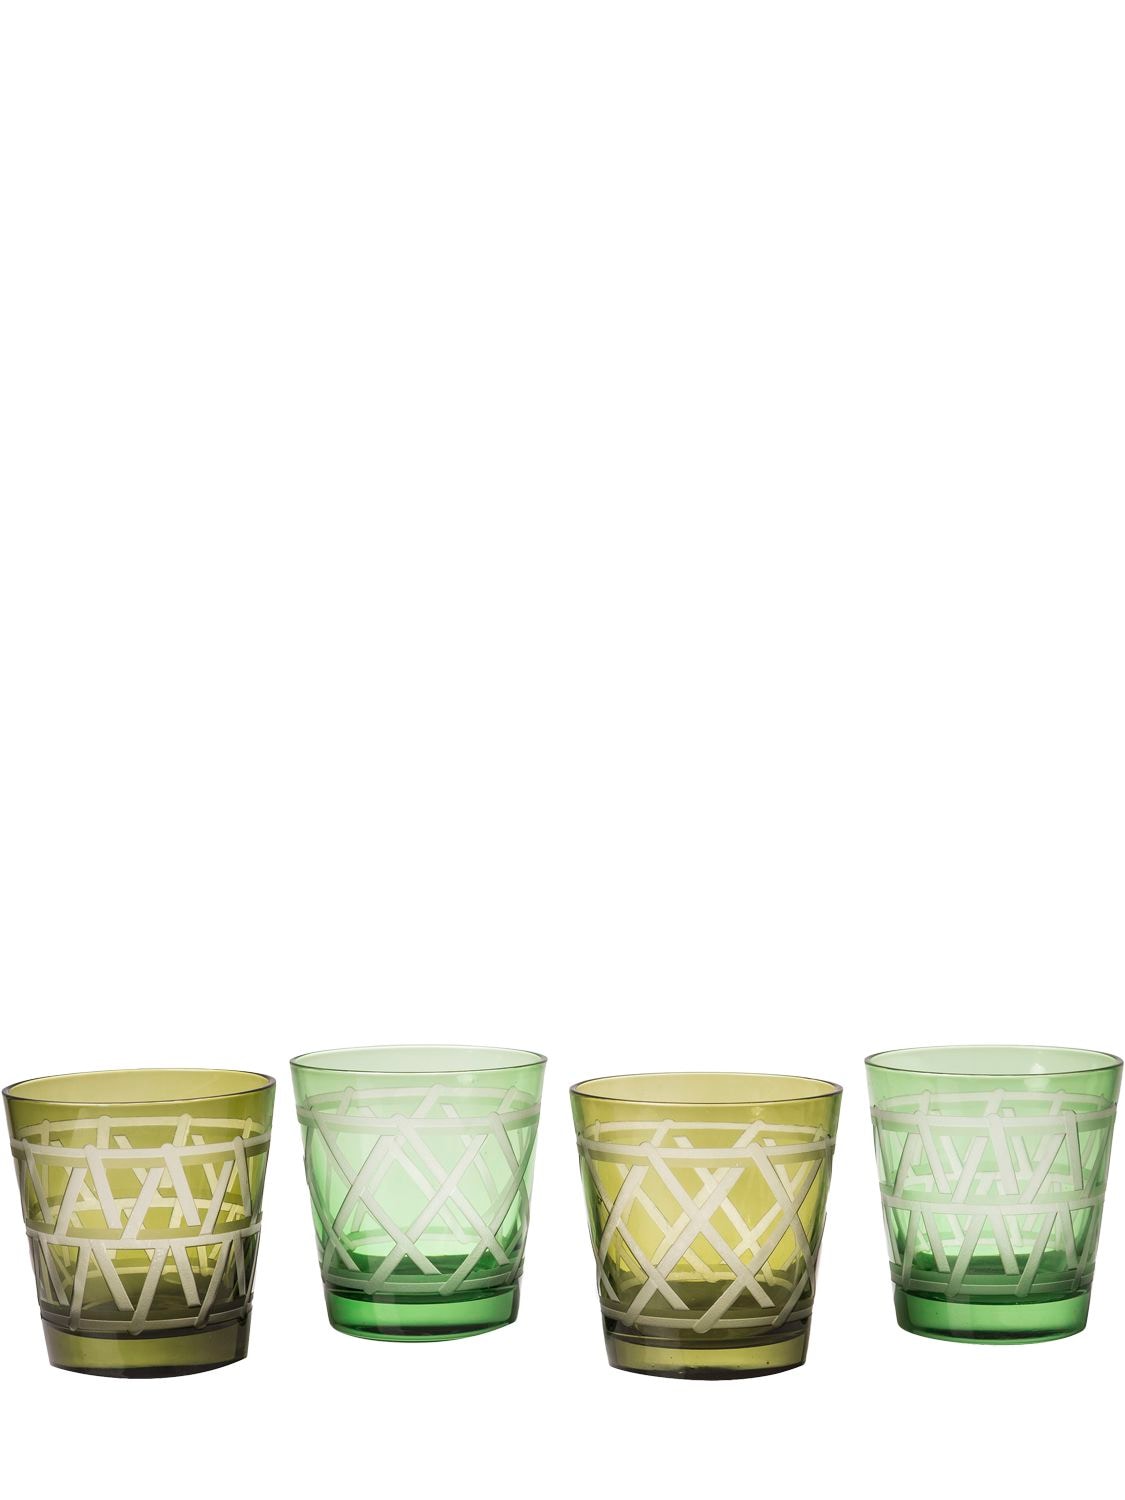 Polspotten Tie Up Set Of 4 Glass Tumblers In Multi-colour